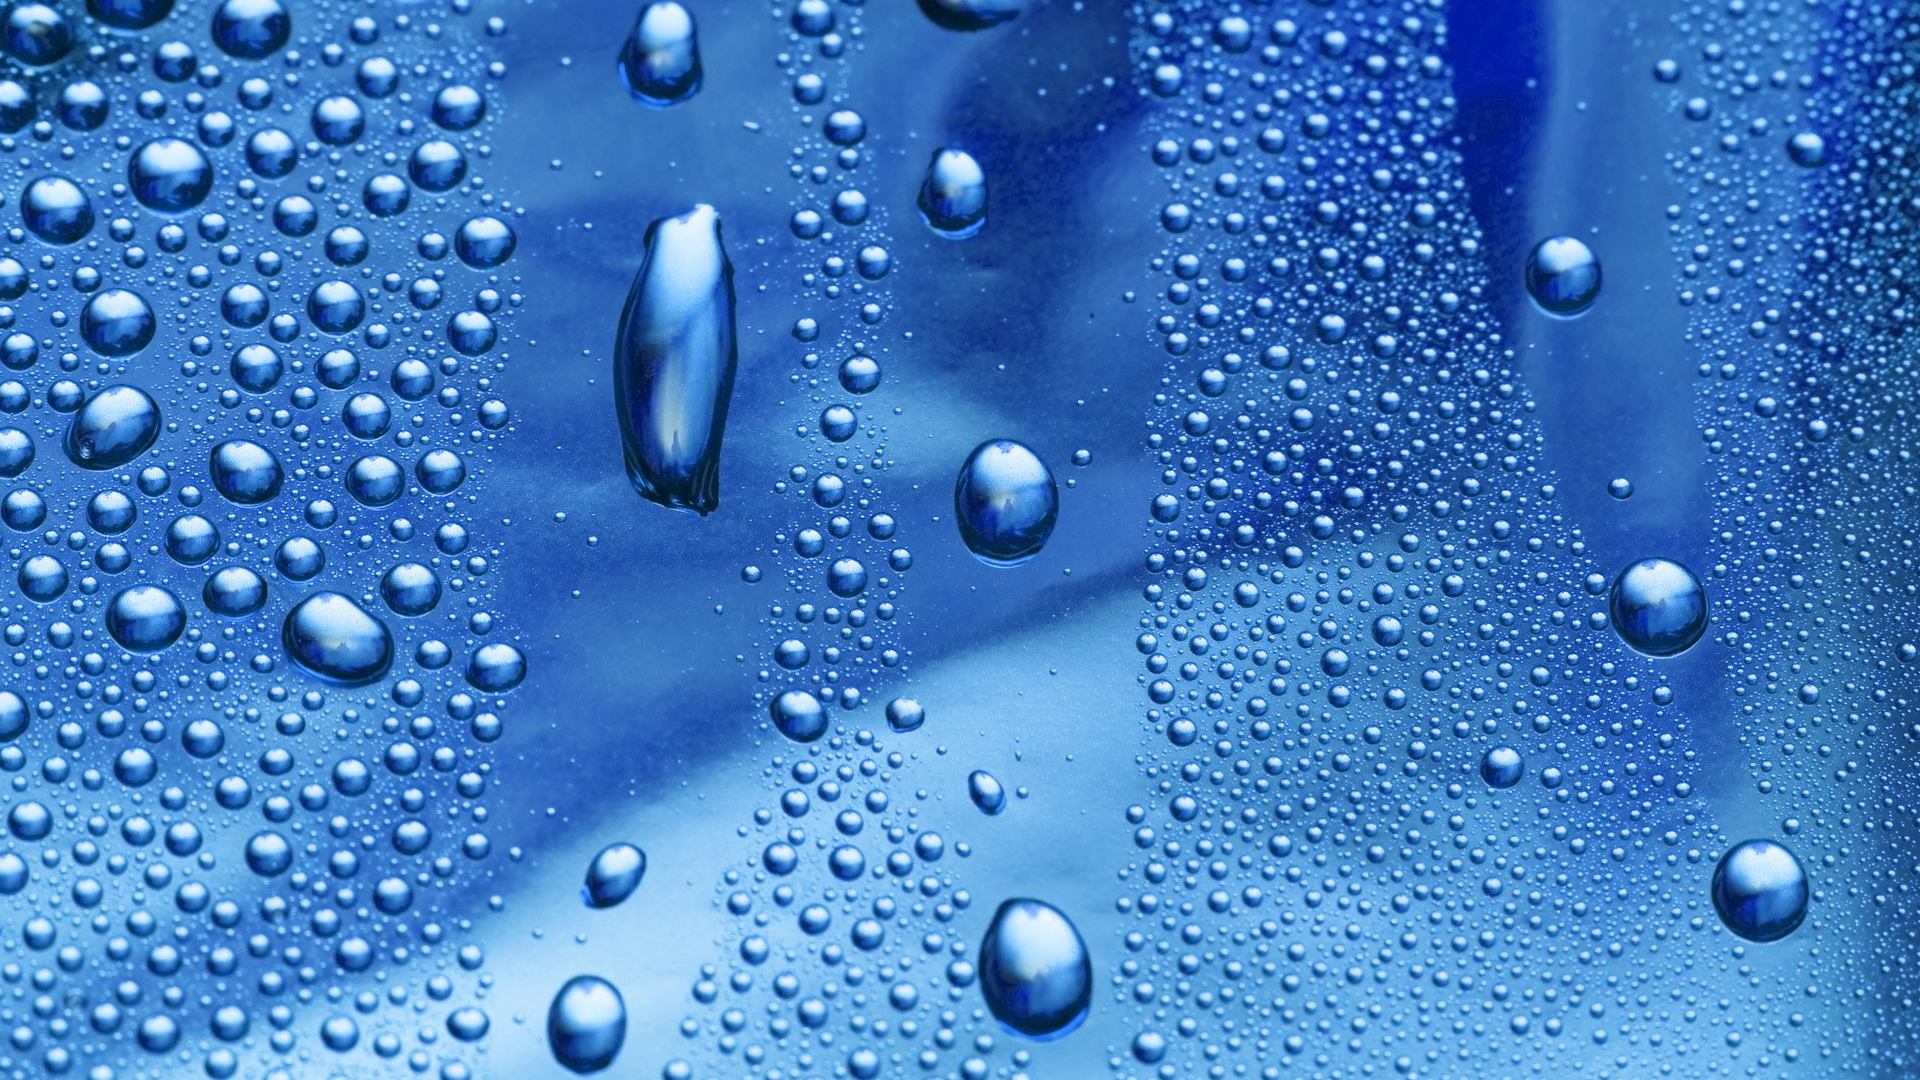 Blue Abstract Wallpaper 1080p 15545 Hd Wallpapers Background 1920x1080